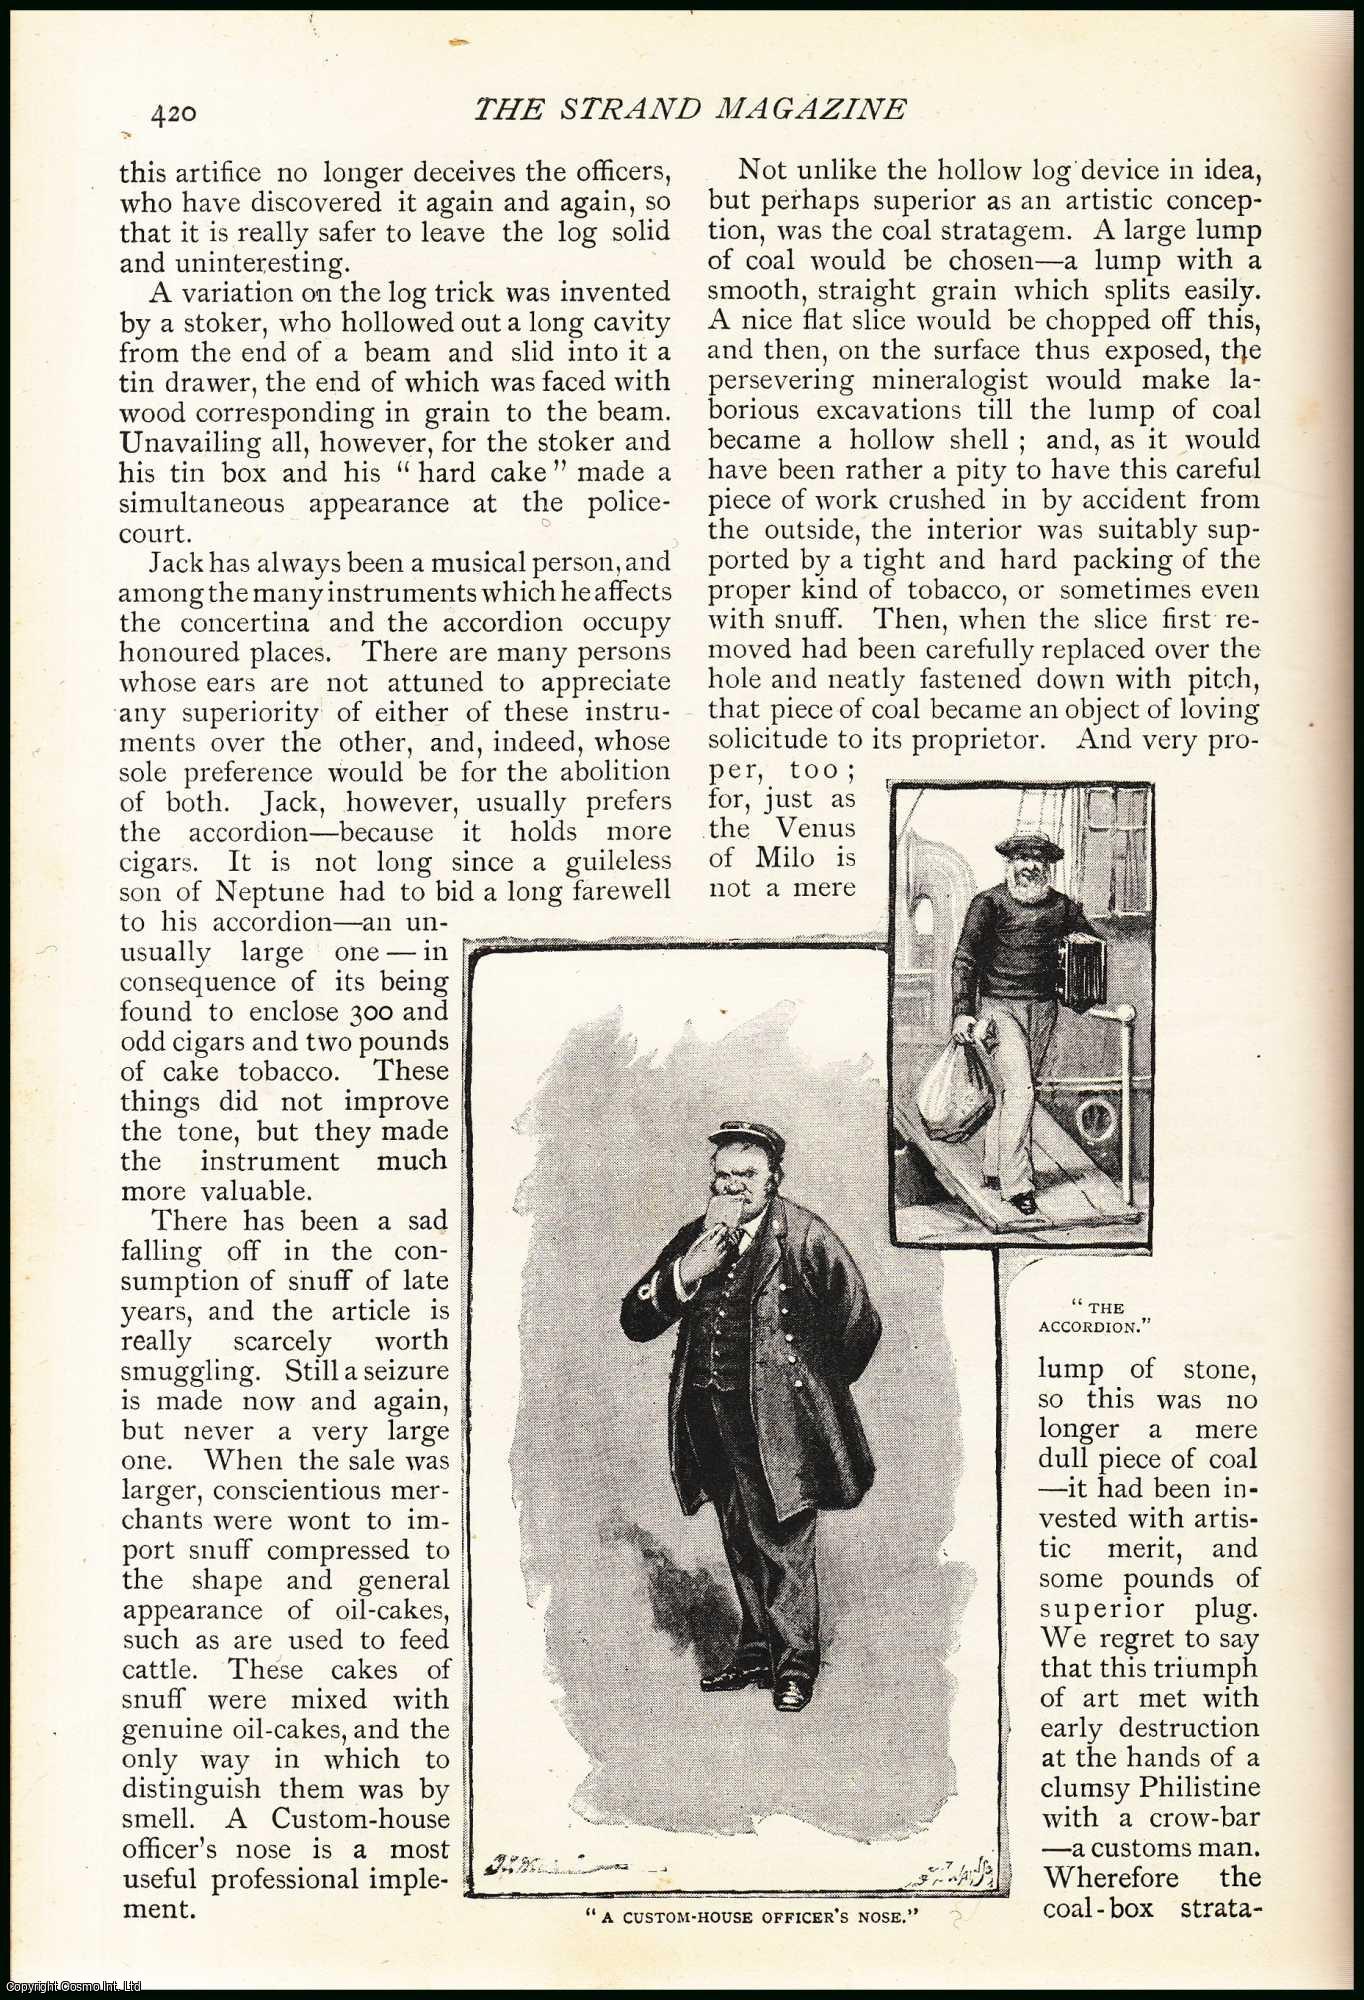 Strand Magazine - A Smugglers Devices : devices used for smuggling tobacco, spirits, etc into customs. An uncommon original article from The Strand Magazine, 1891.